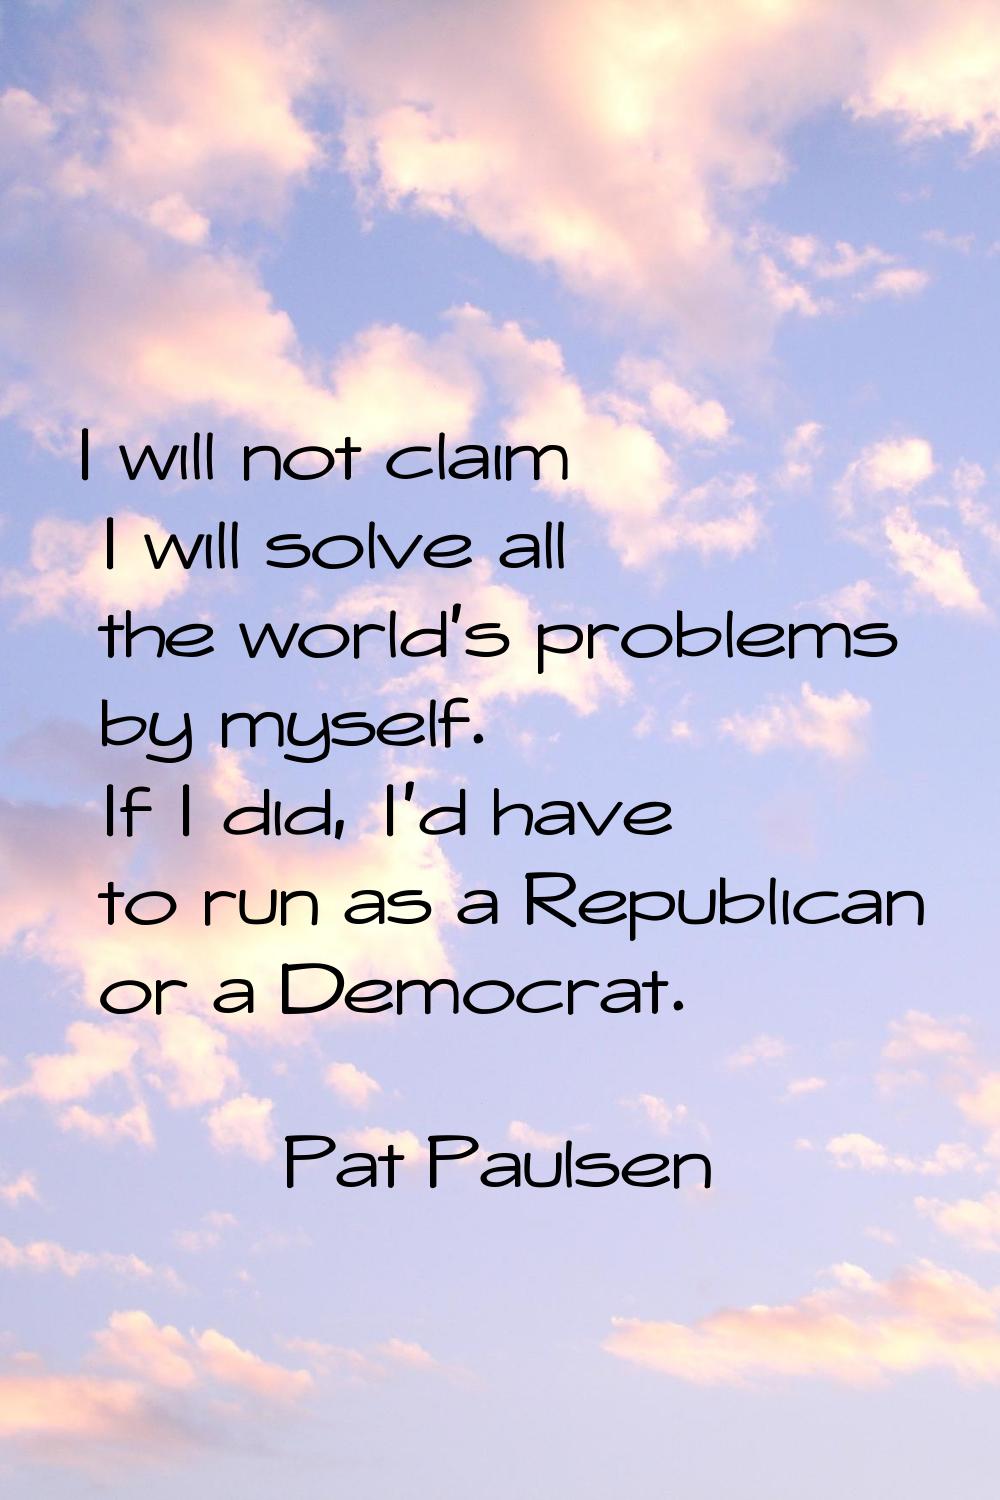 I will not claim I will solve all the world's problems by myself. If I did, I'd have to run as a Re